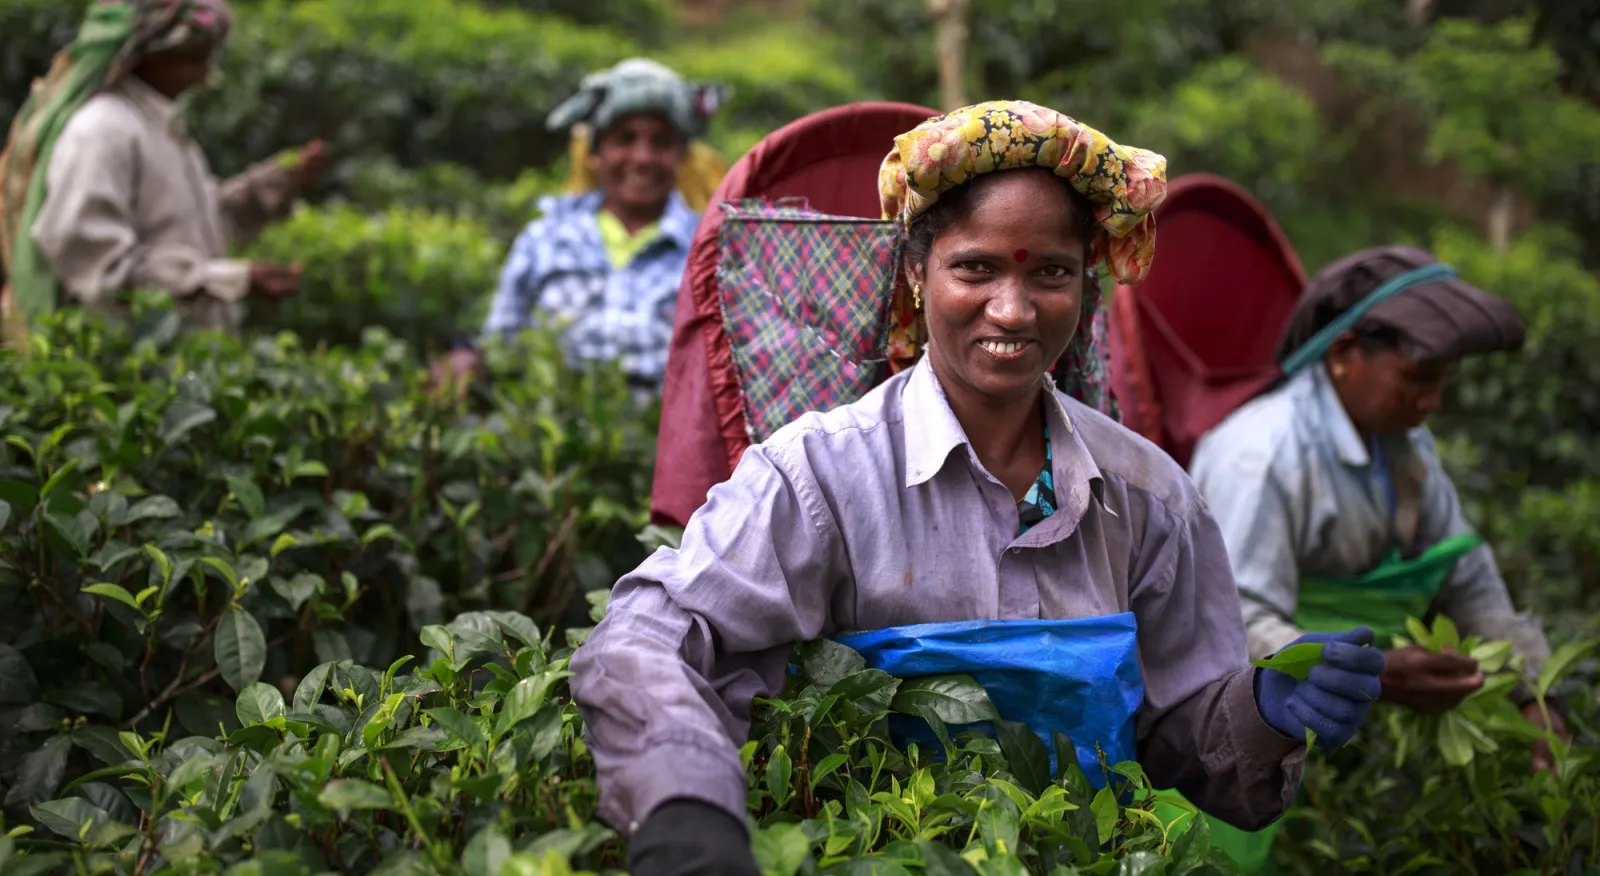 A woman is in a field with other women, baskets on their back. She smiles at the camera.